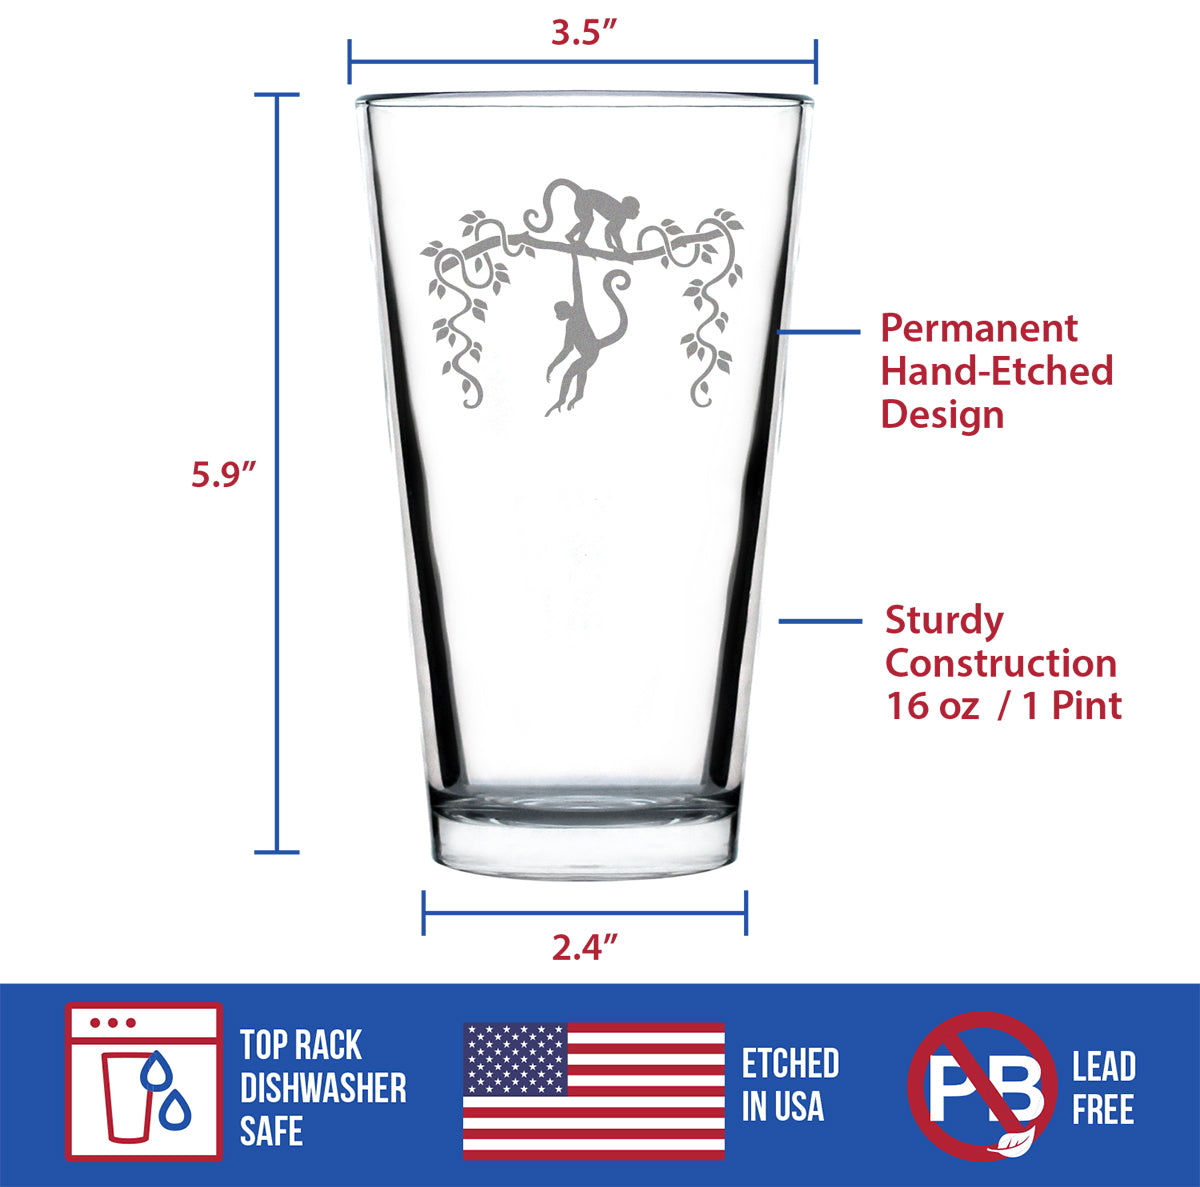 Monkey Pint Glass for Beer - Fun Wild Animal Themed Decor and Gifts for Lovers of Apes and Monkeys - 16 Oz Glasses